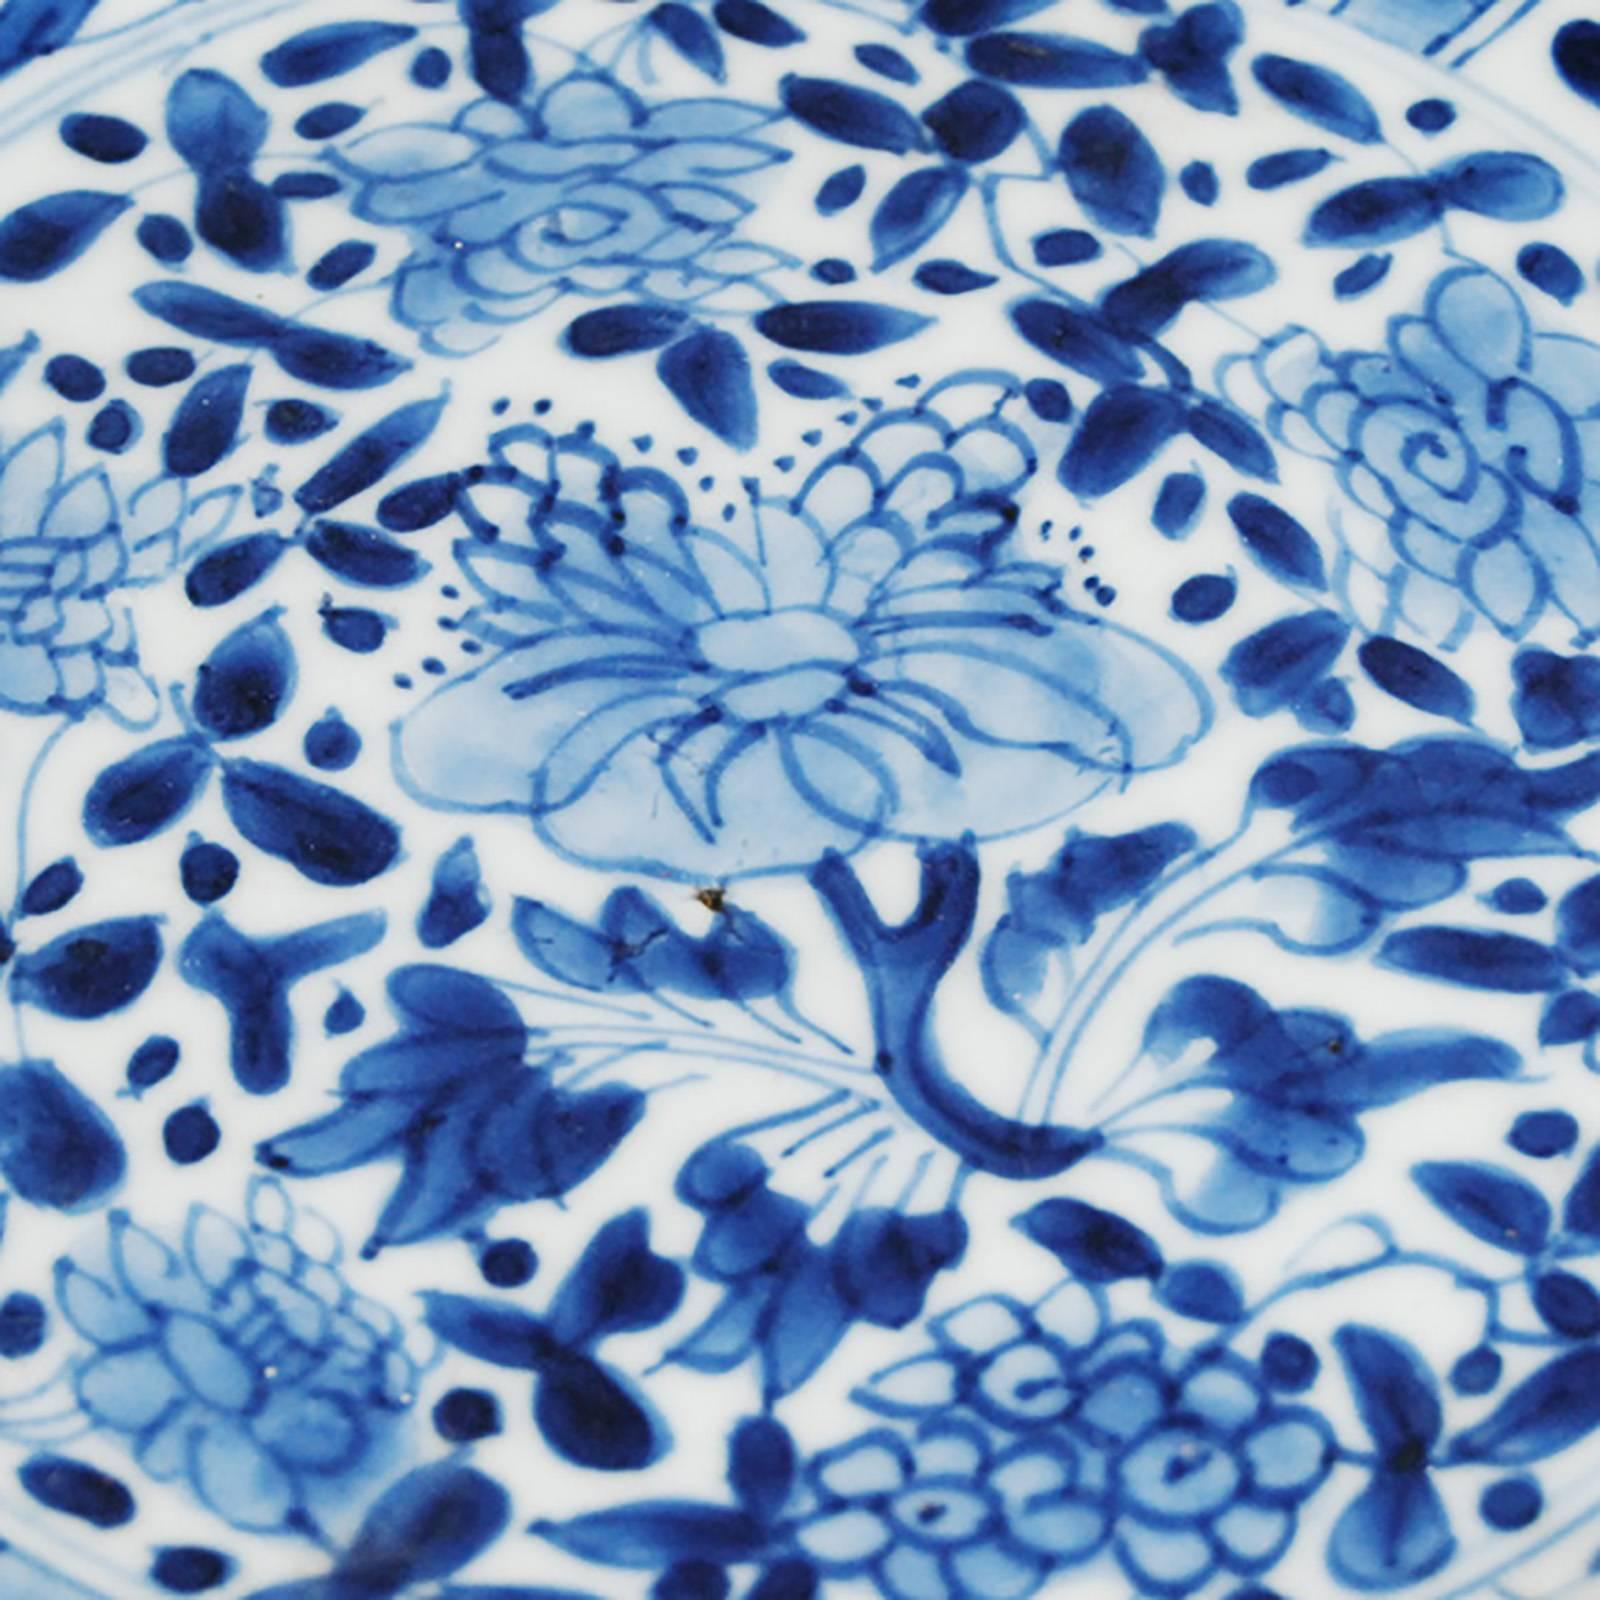 Given its beautiful designs and expert craftsmanship, it’s no wonder Europeans clamored for Chinese blue-and-white ceramic ware once trade opened between East and West. Demand was so great that in the 17th-century Chinese began exporting